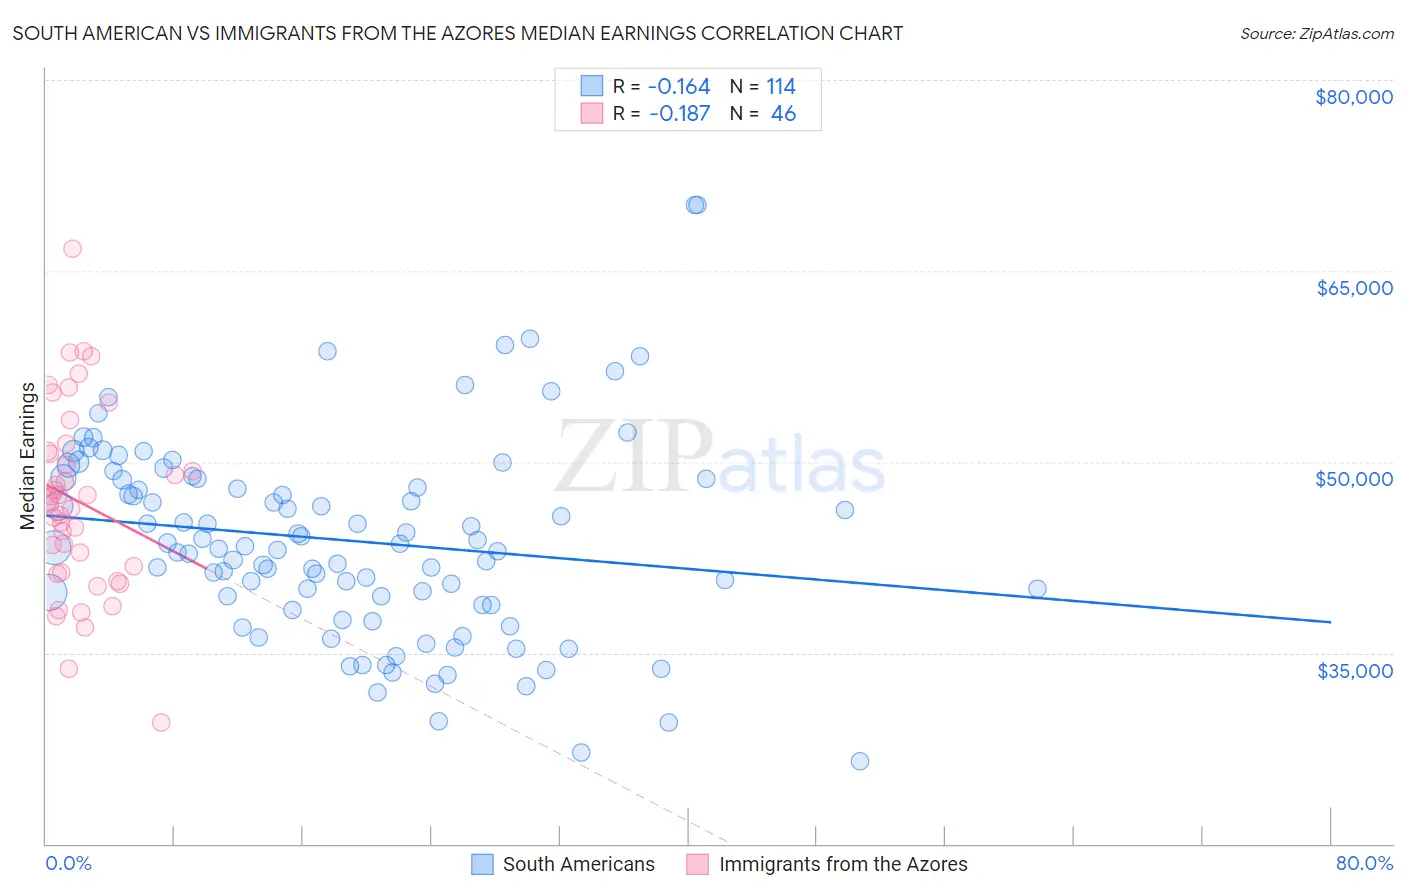 South American vs Immigrants from the Azores Median Earnings